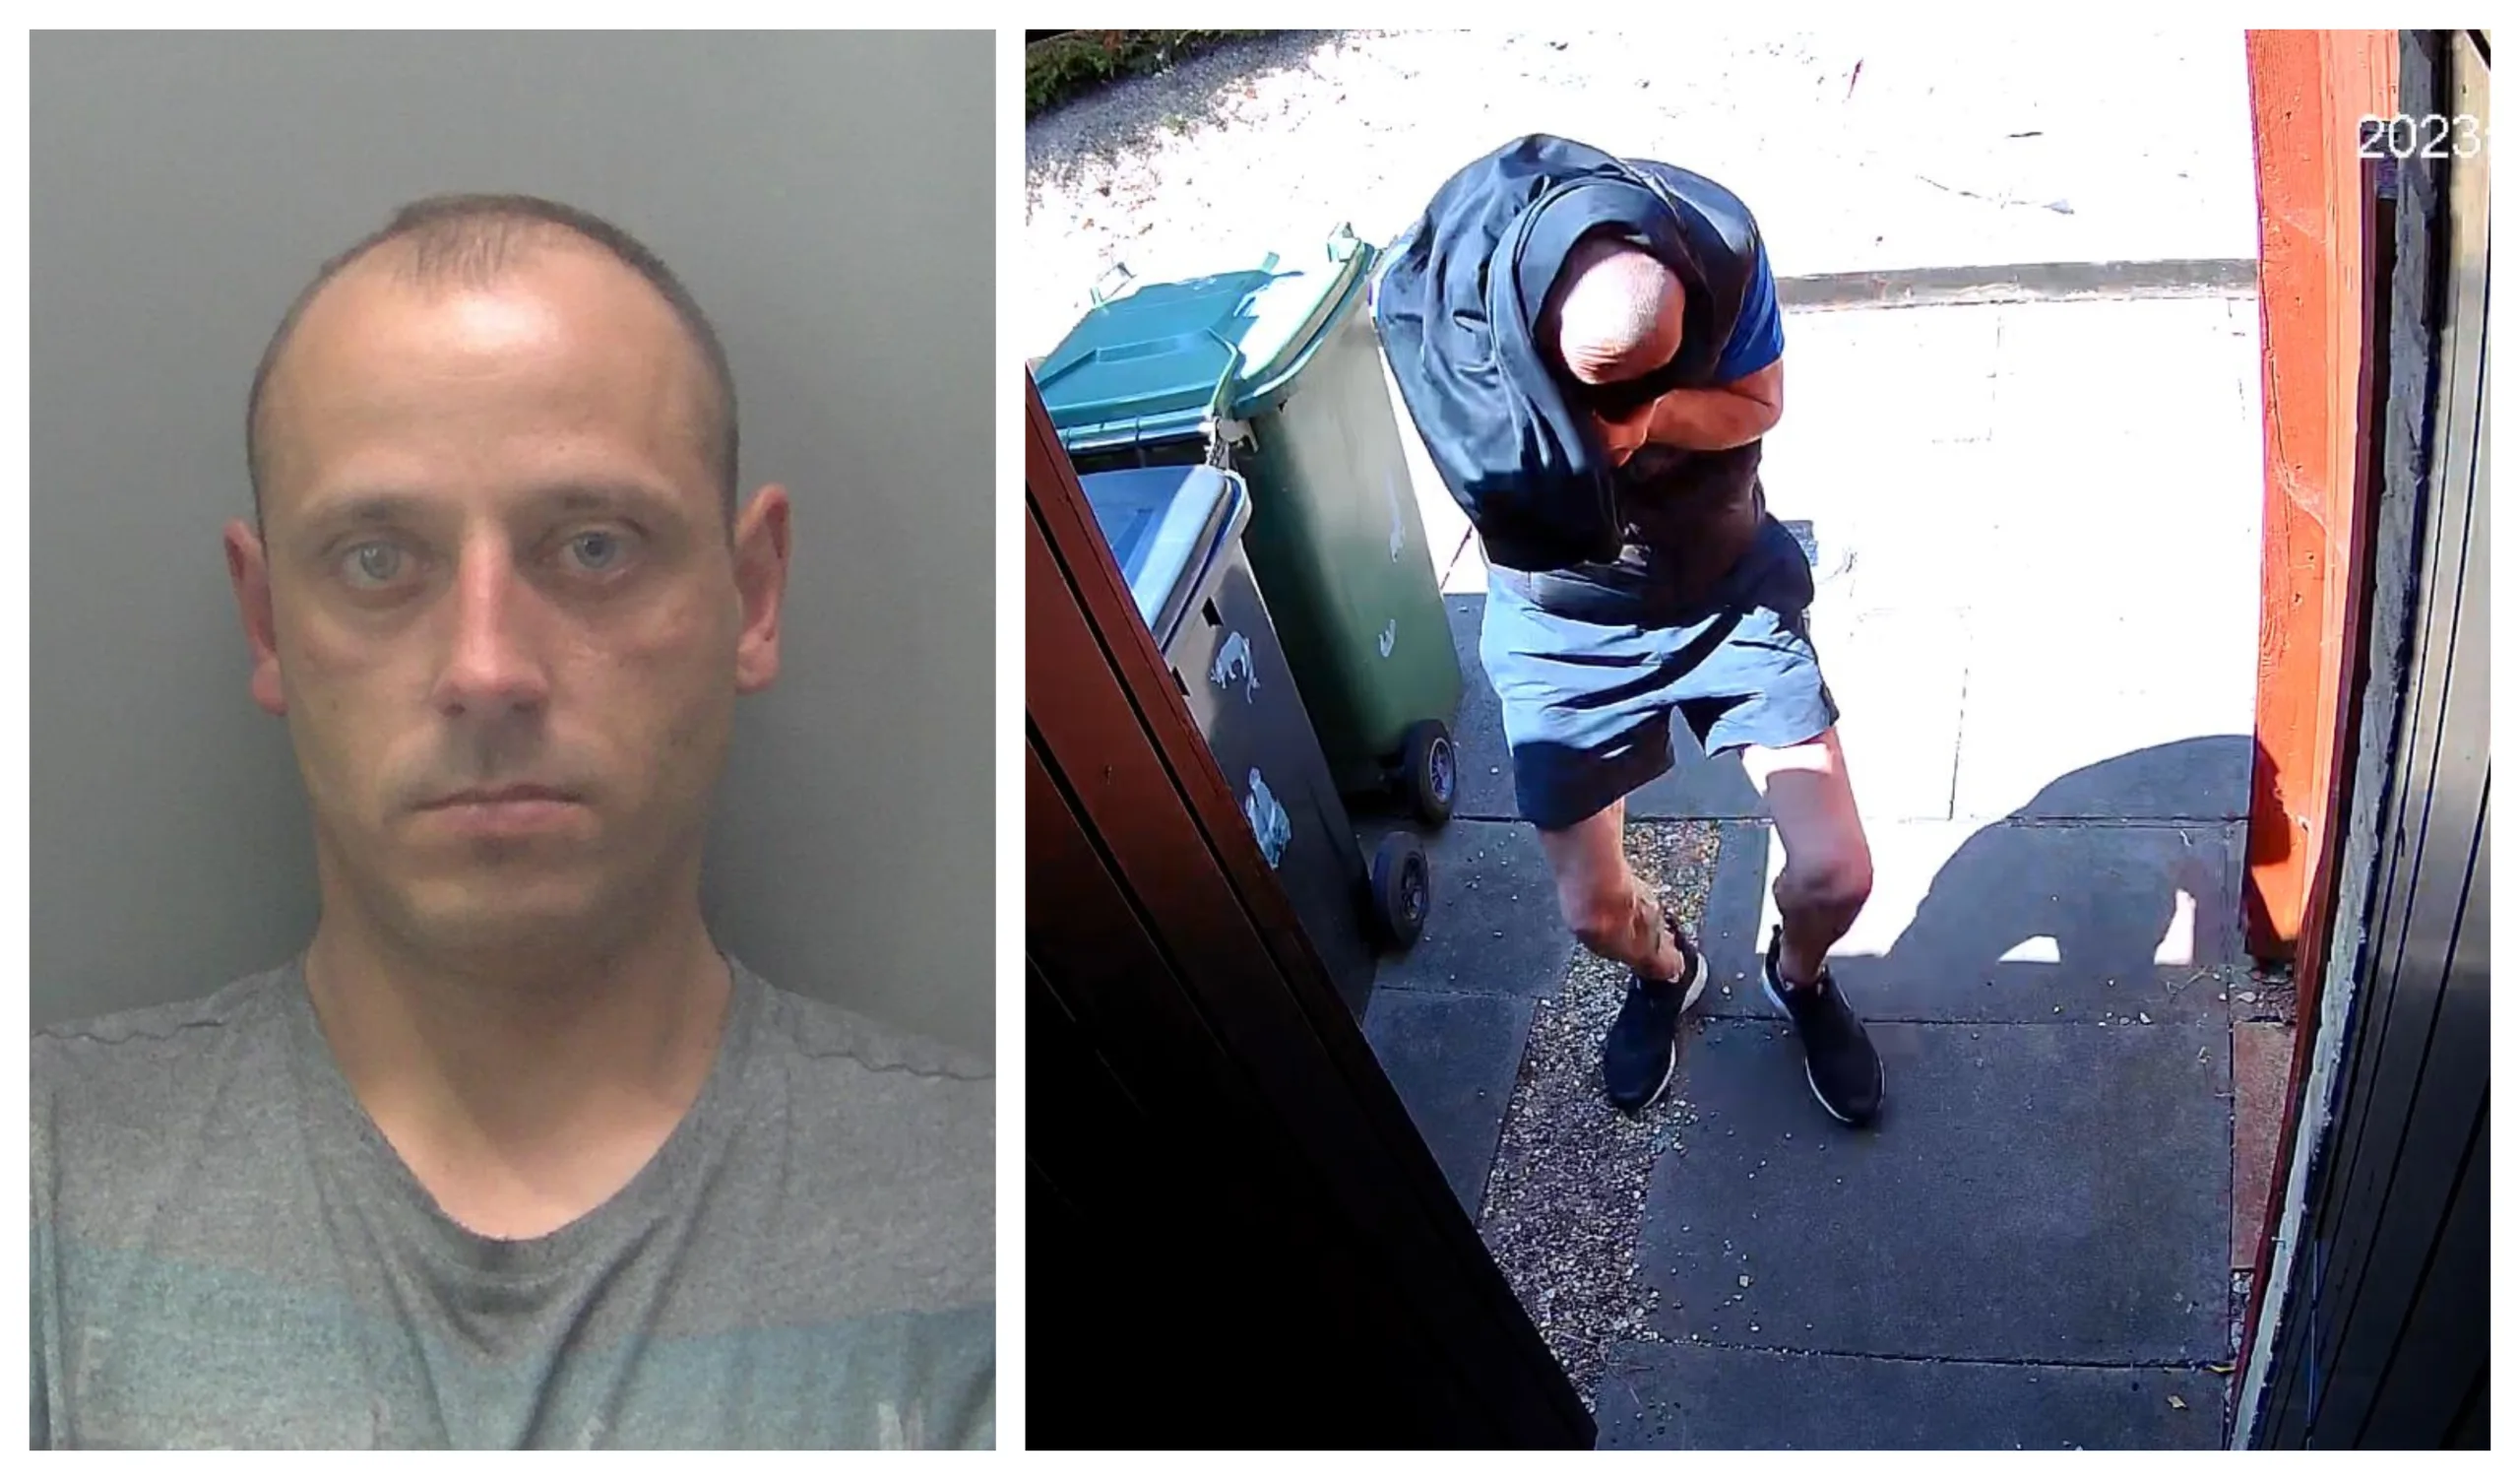 Eduard Sokolov, of Eastfield Grove, Peterborough, was caught on CCTV adjusting the angle and then disconnecting the security camera at his victim’s home. He’s been jailed.